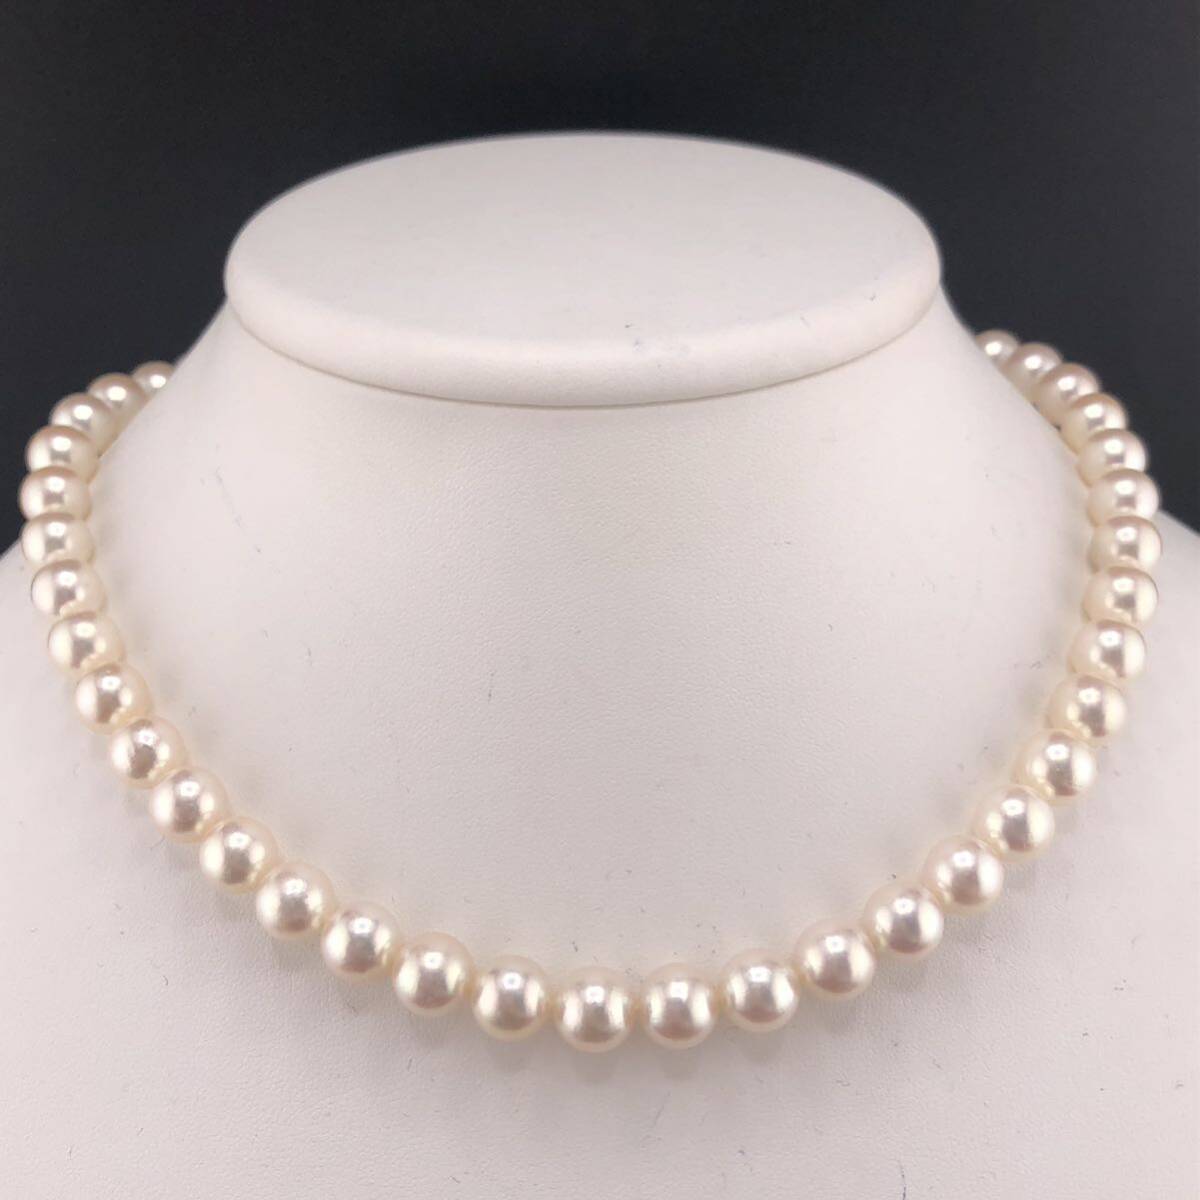 E03-9250 アコヤパールネックレス 8.5mm~9.0mm 41cm 46.8g ( アコヤ真珠 Pearl necklace SILVER )の画像1